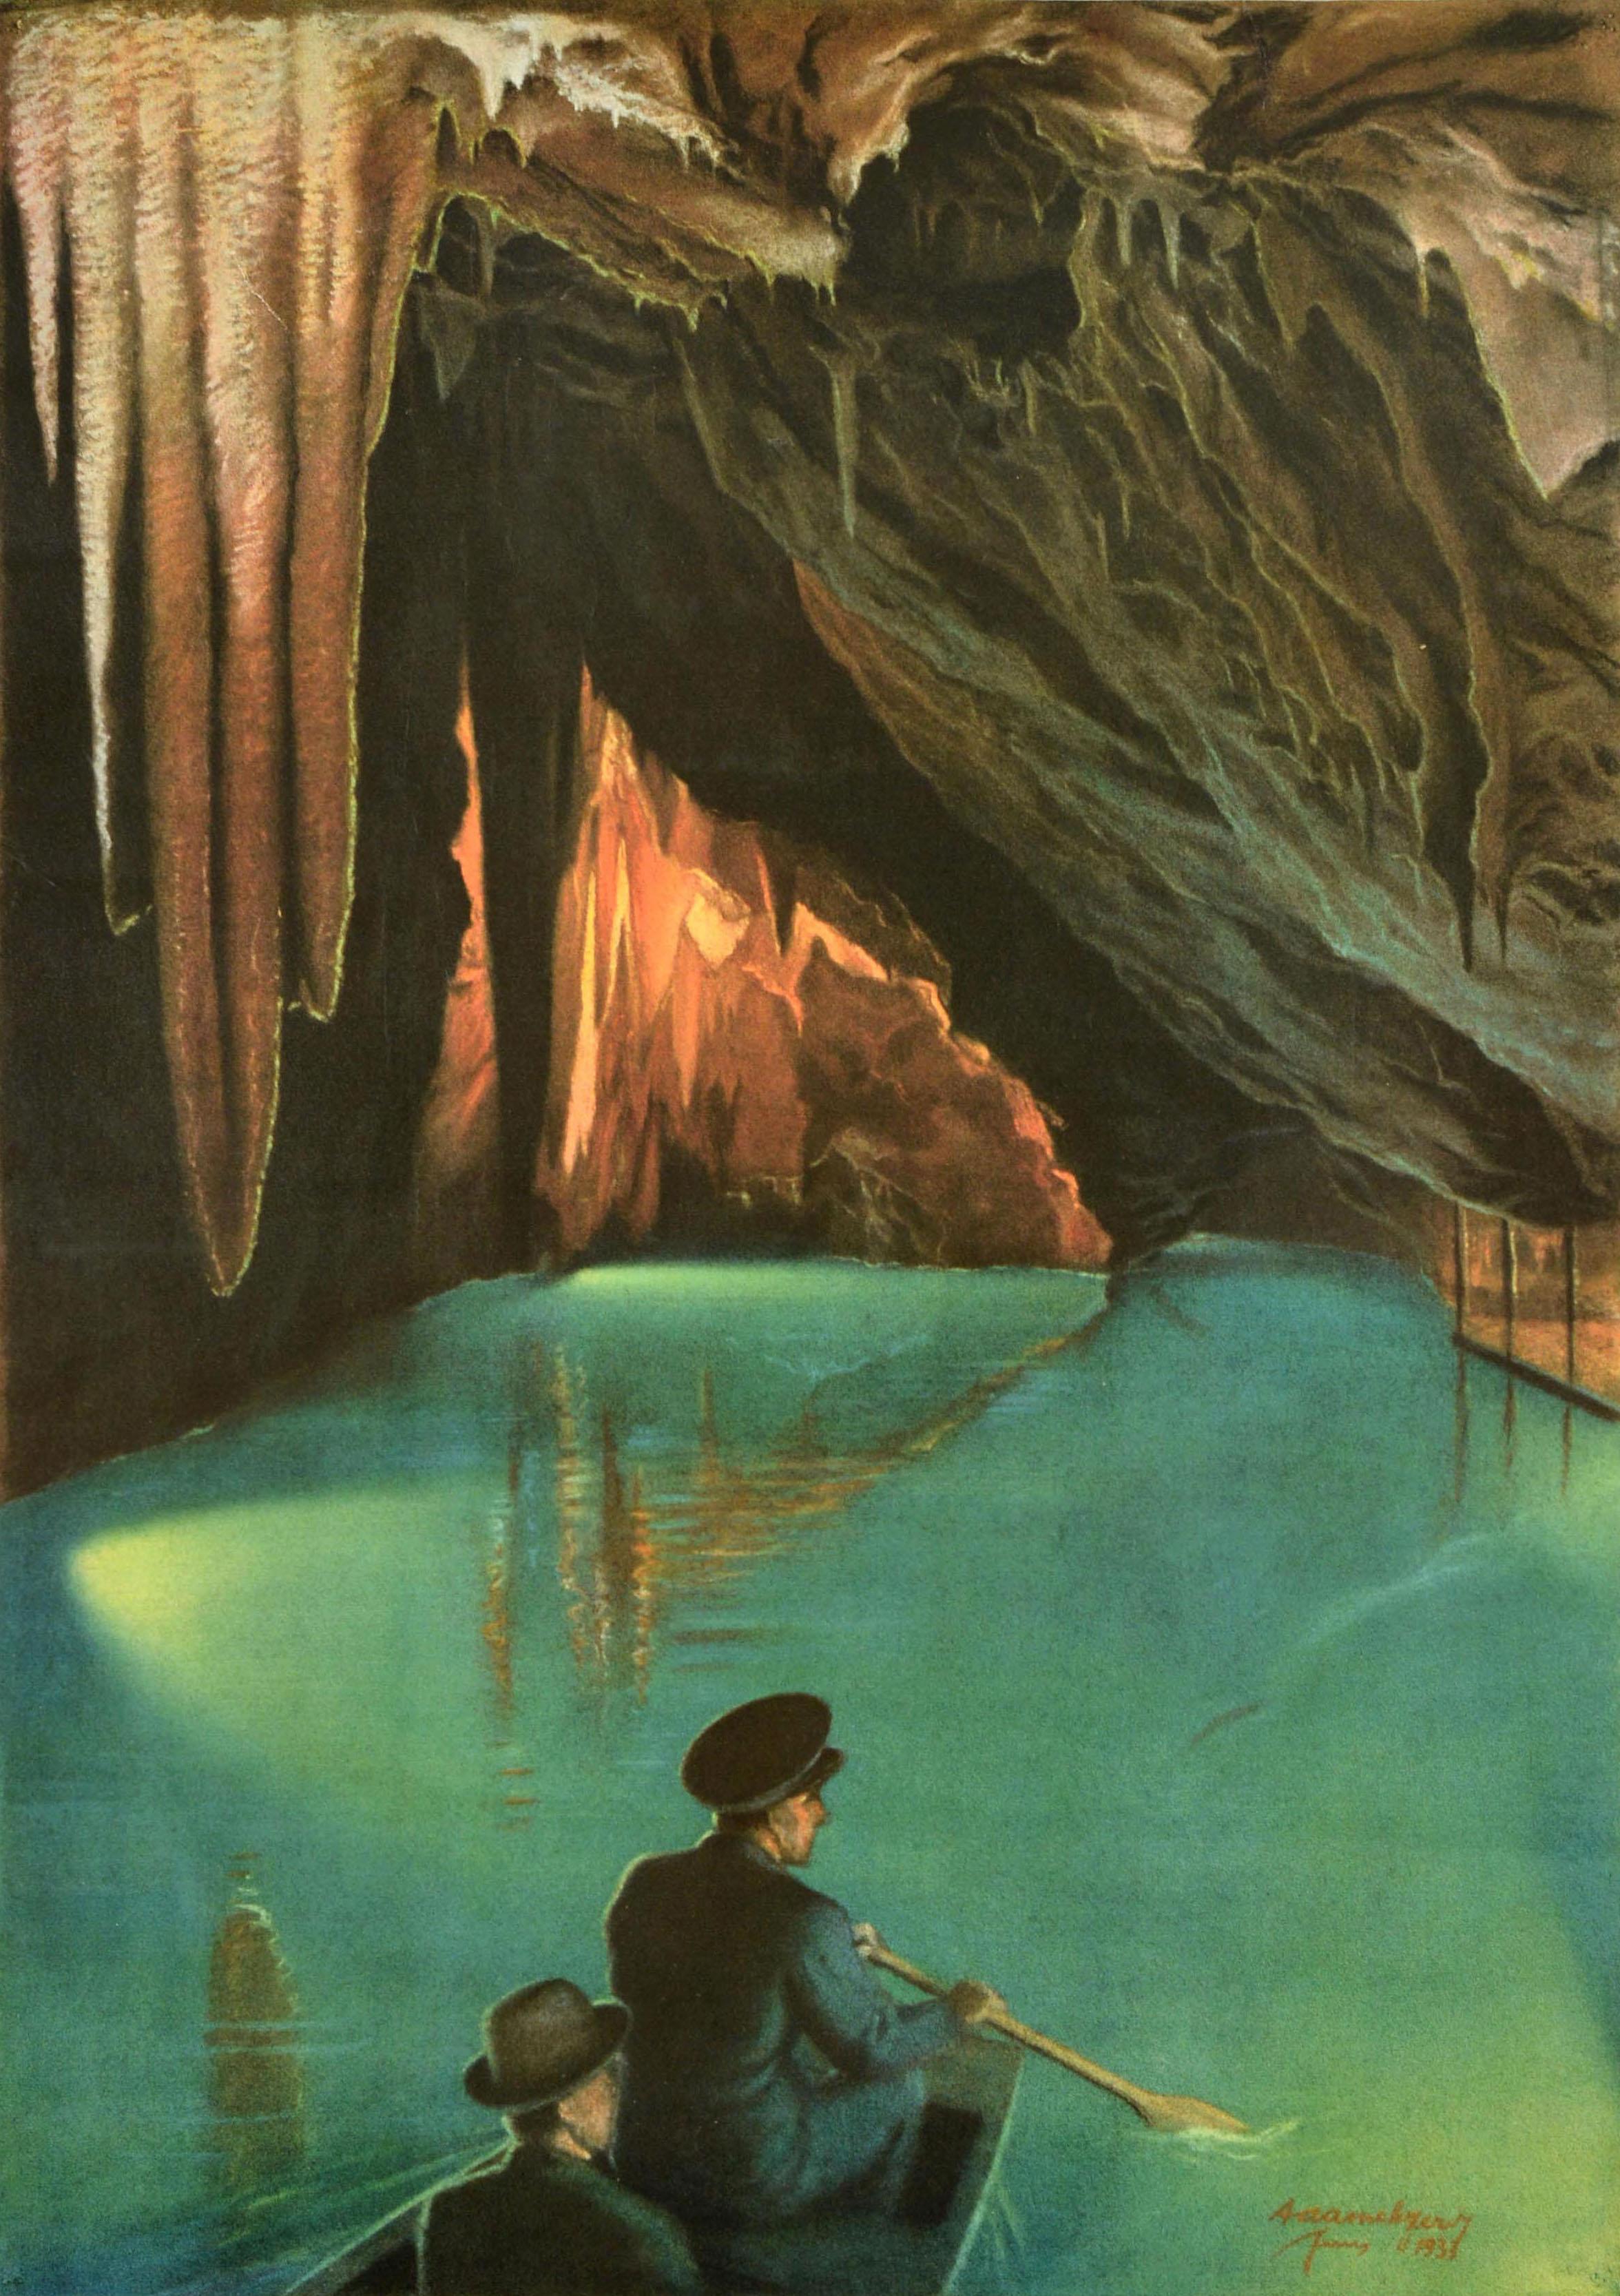 Original vintage train travel poster - The Czechoslovak State Railways The Stalactite Caves and gigantic chasm of Macocha one of the Wonders of the World - featuring a scenic image of people on a rowing boat in the cave below the stalactites